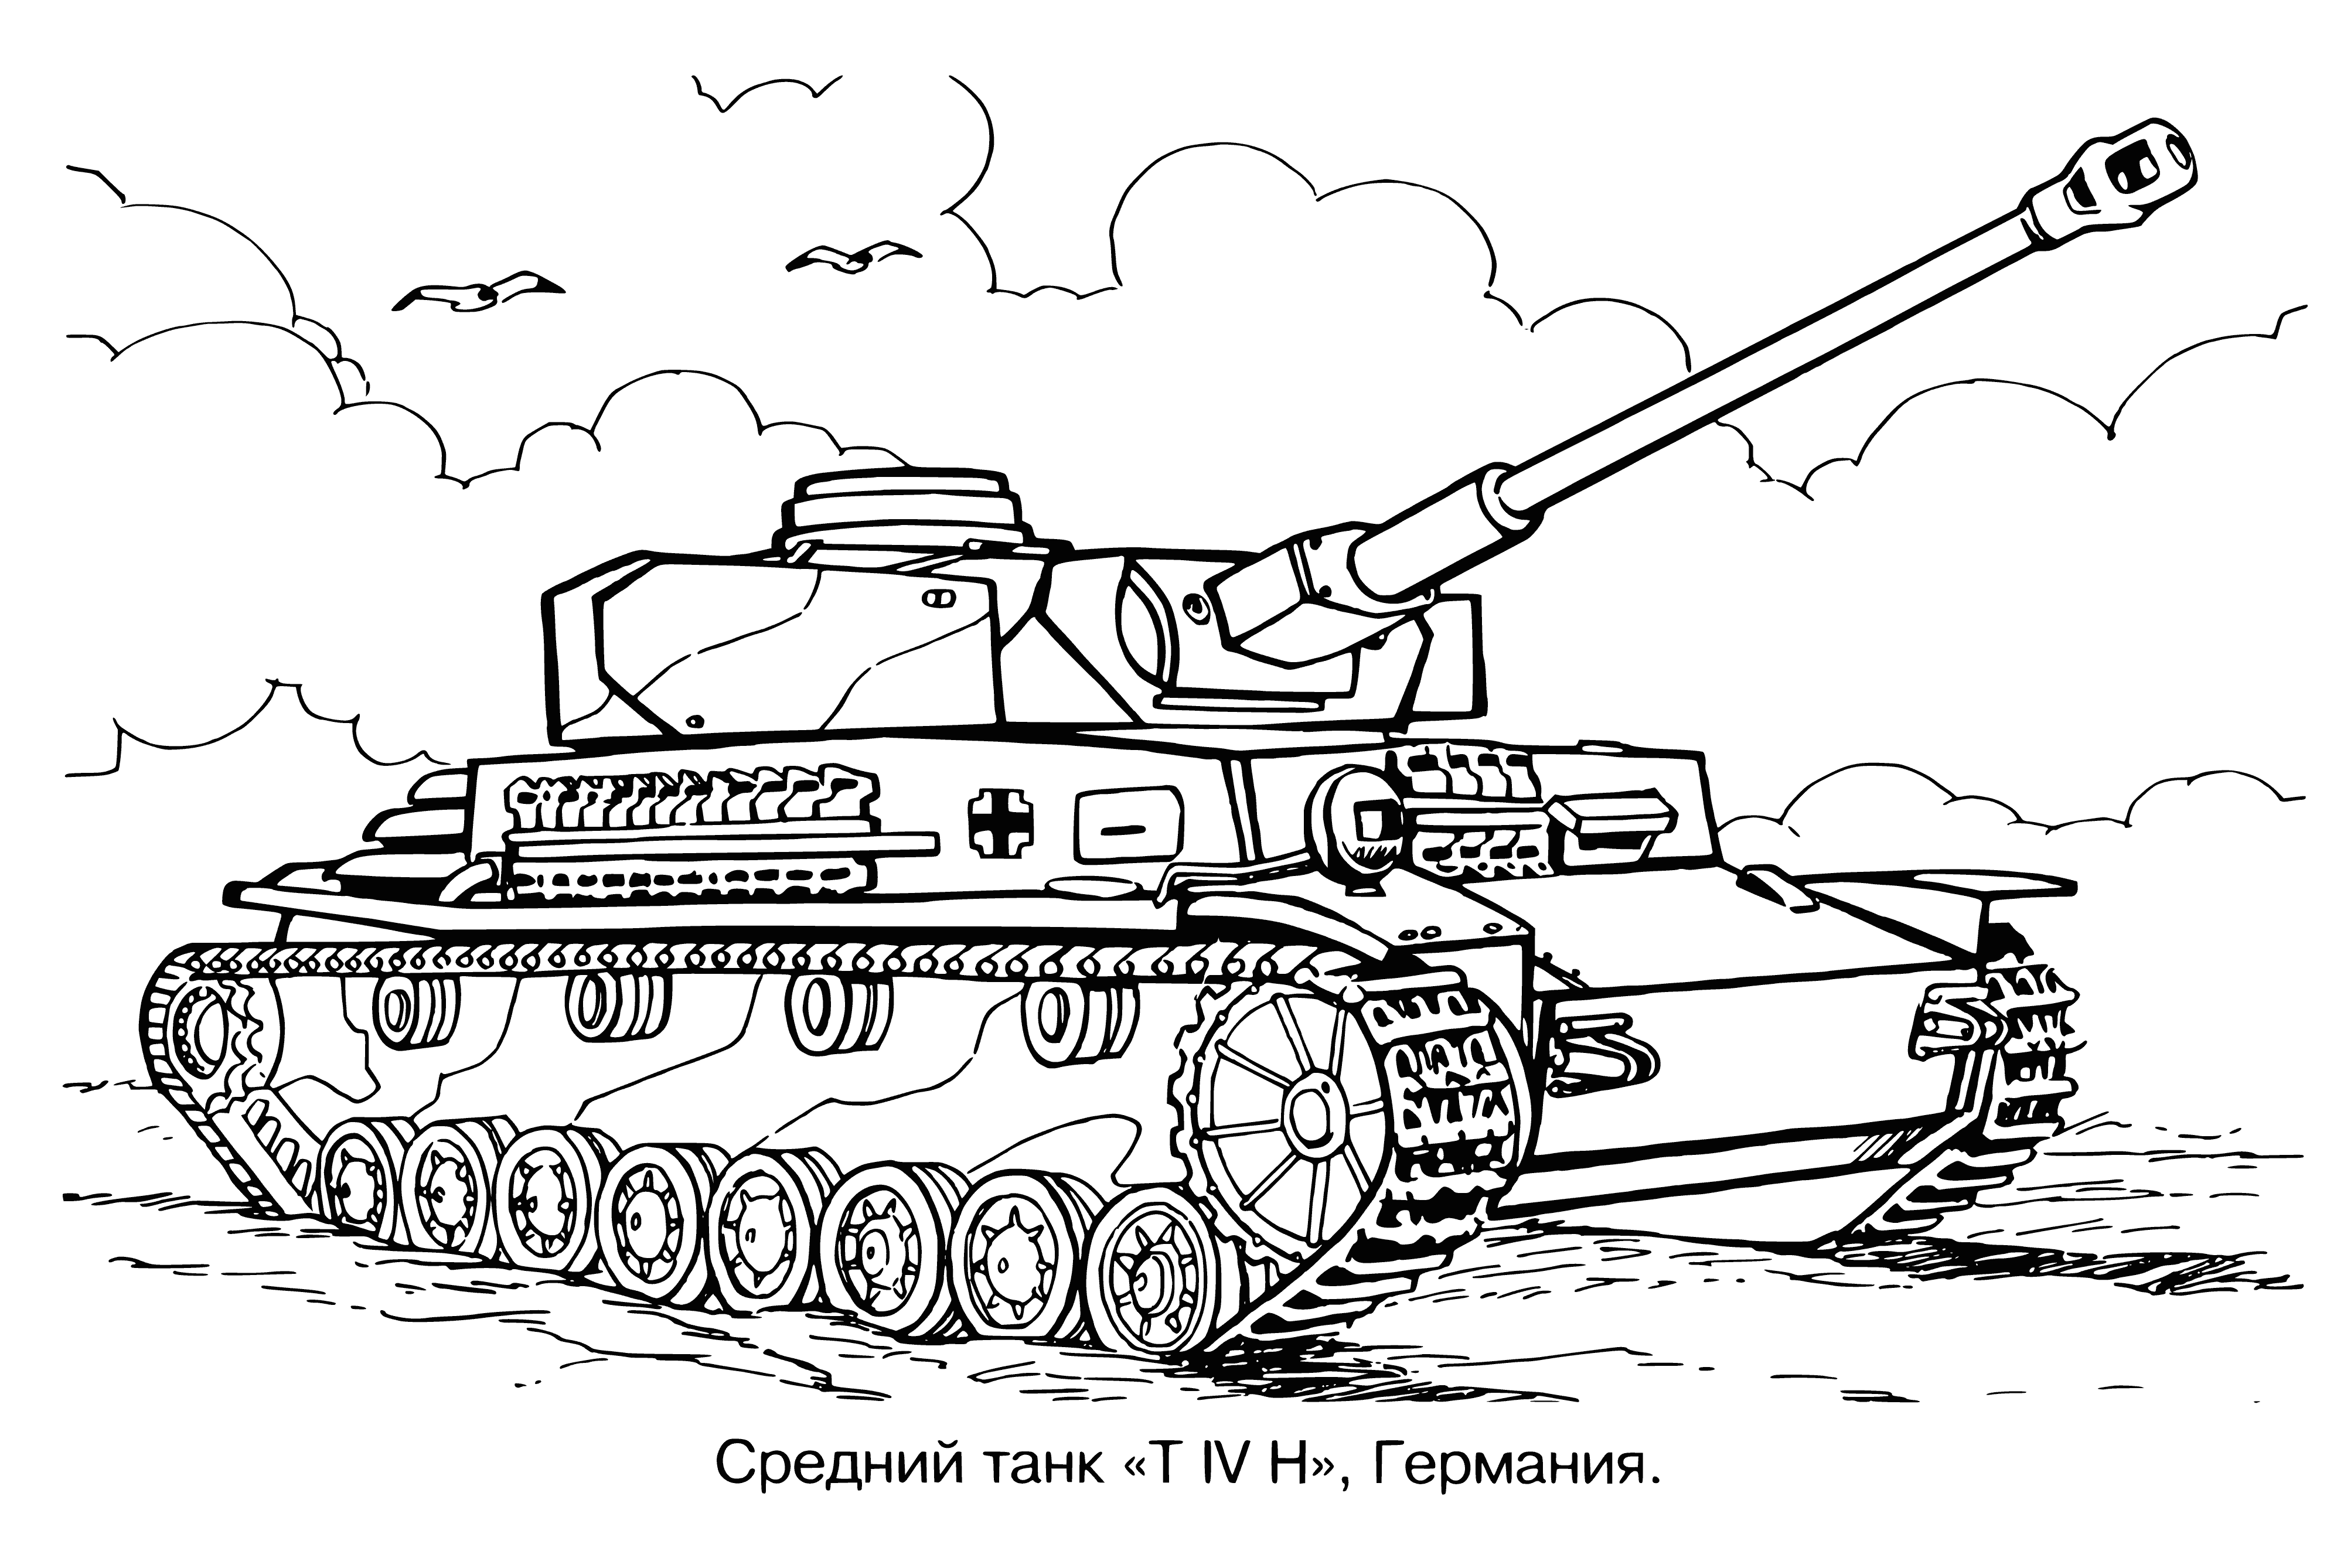 coloring page: Tank on dirt road with turret & machine gun. Camo colors of khaki, brown & green, trees & bushes in background.